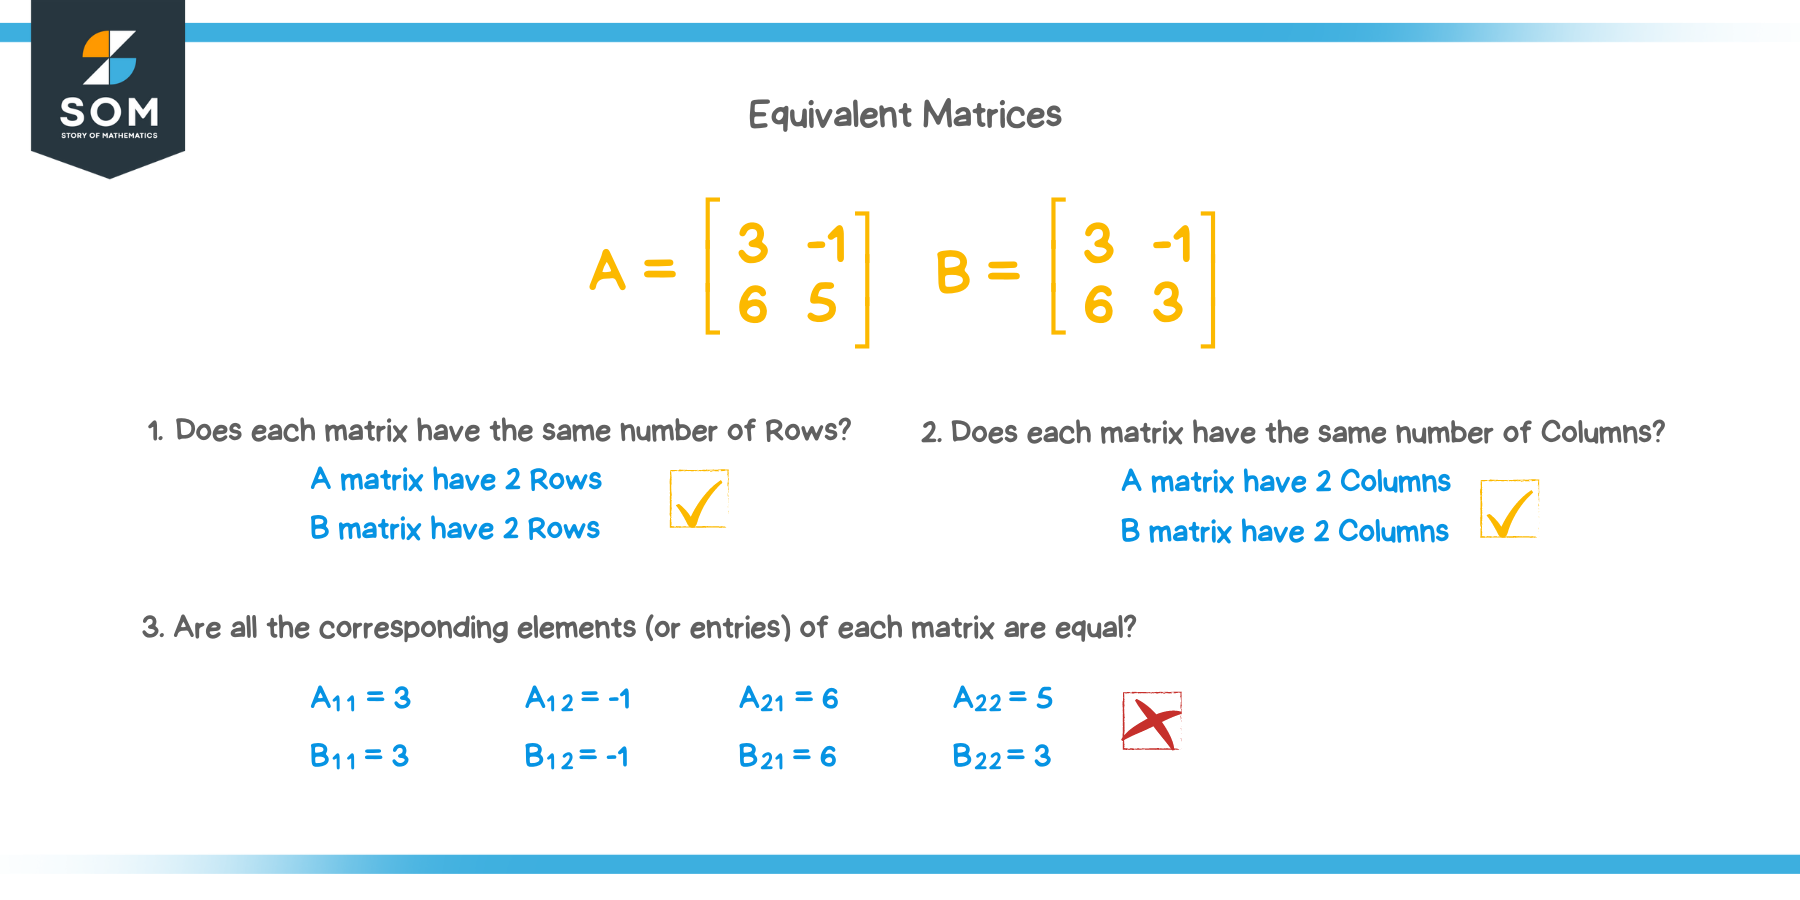 How to tell if two matrices are equivalent?